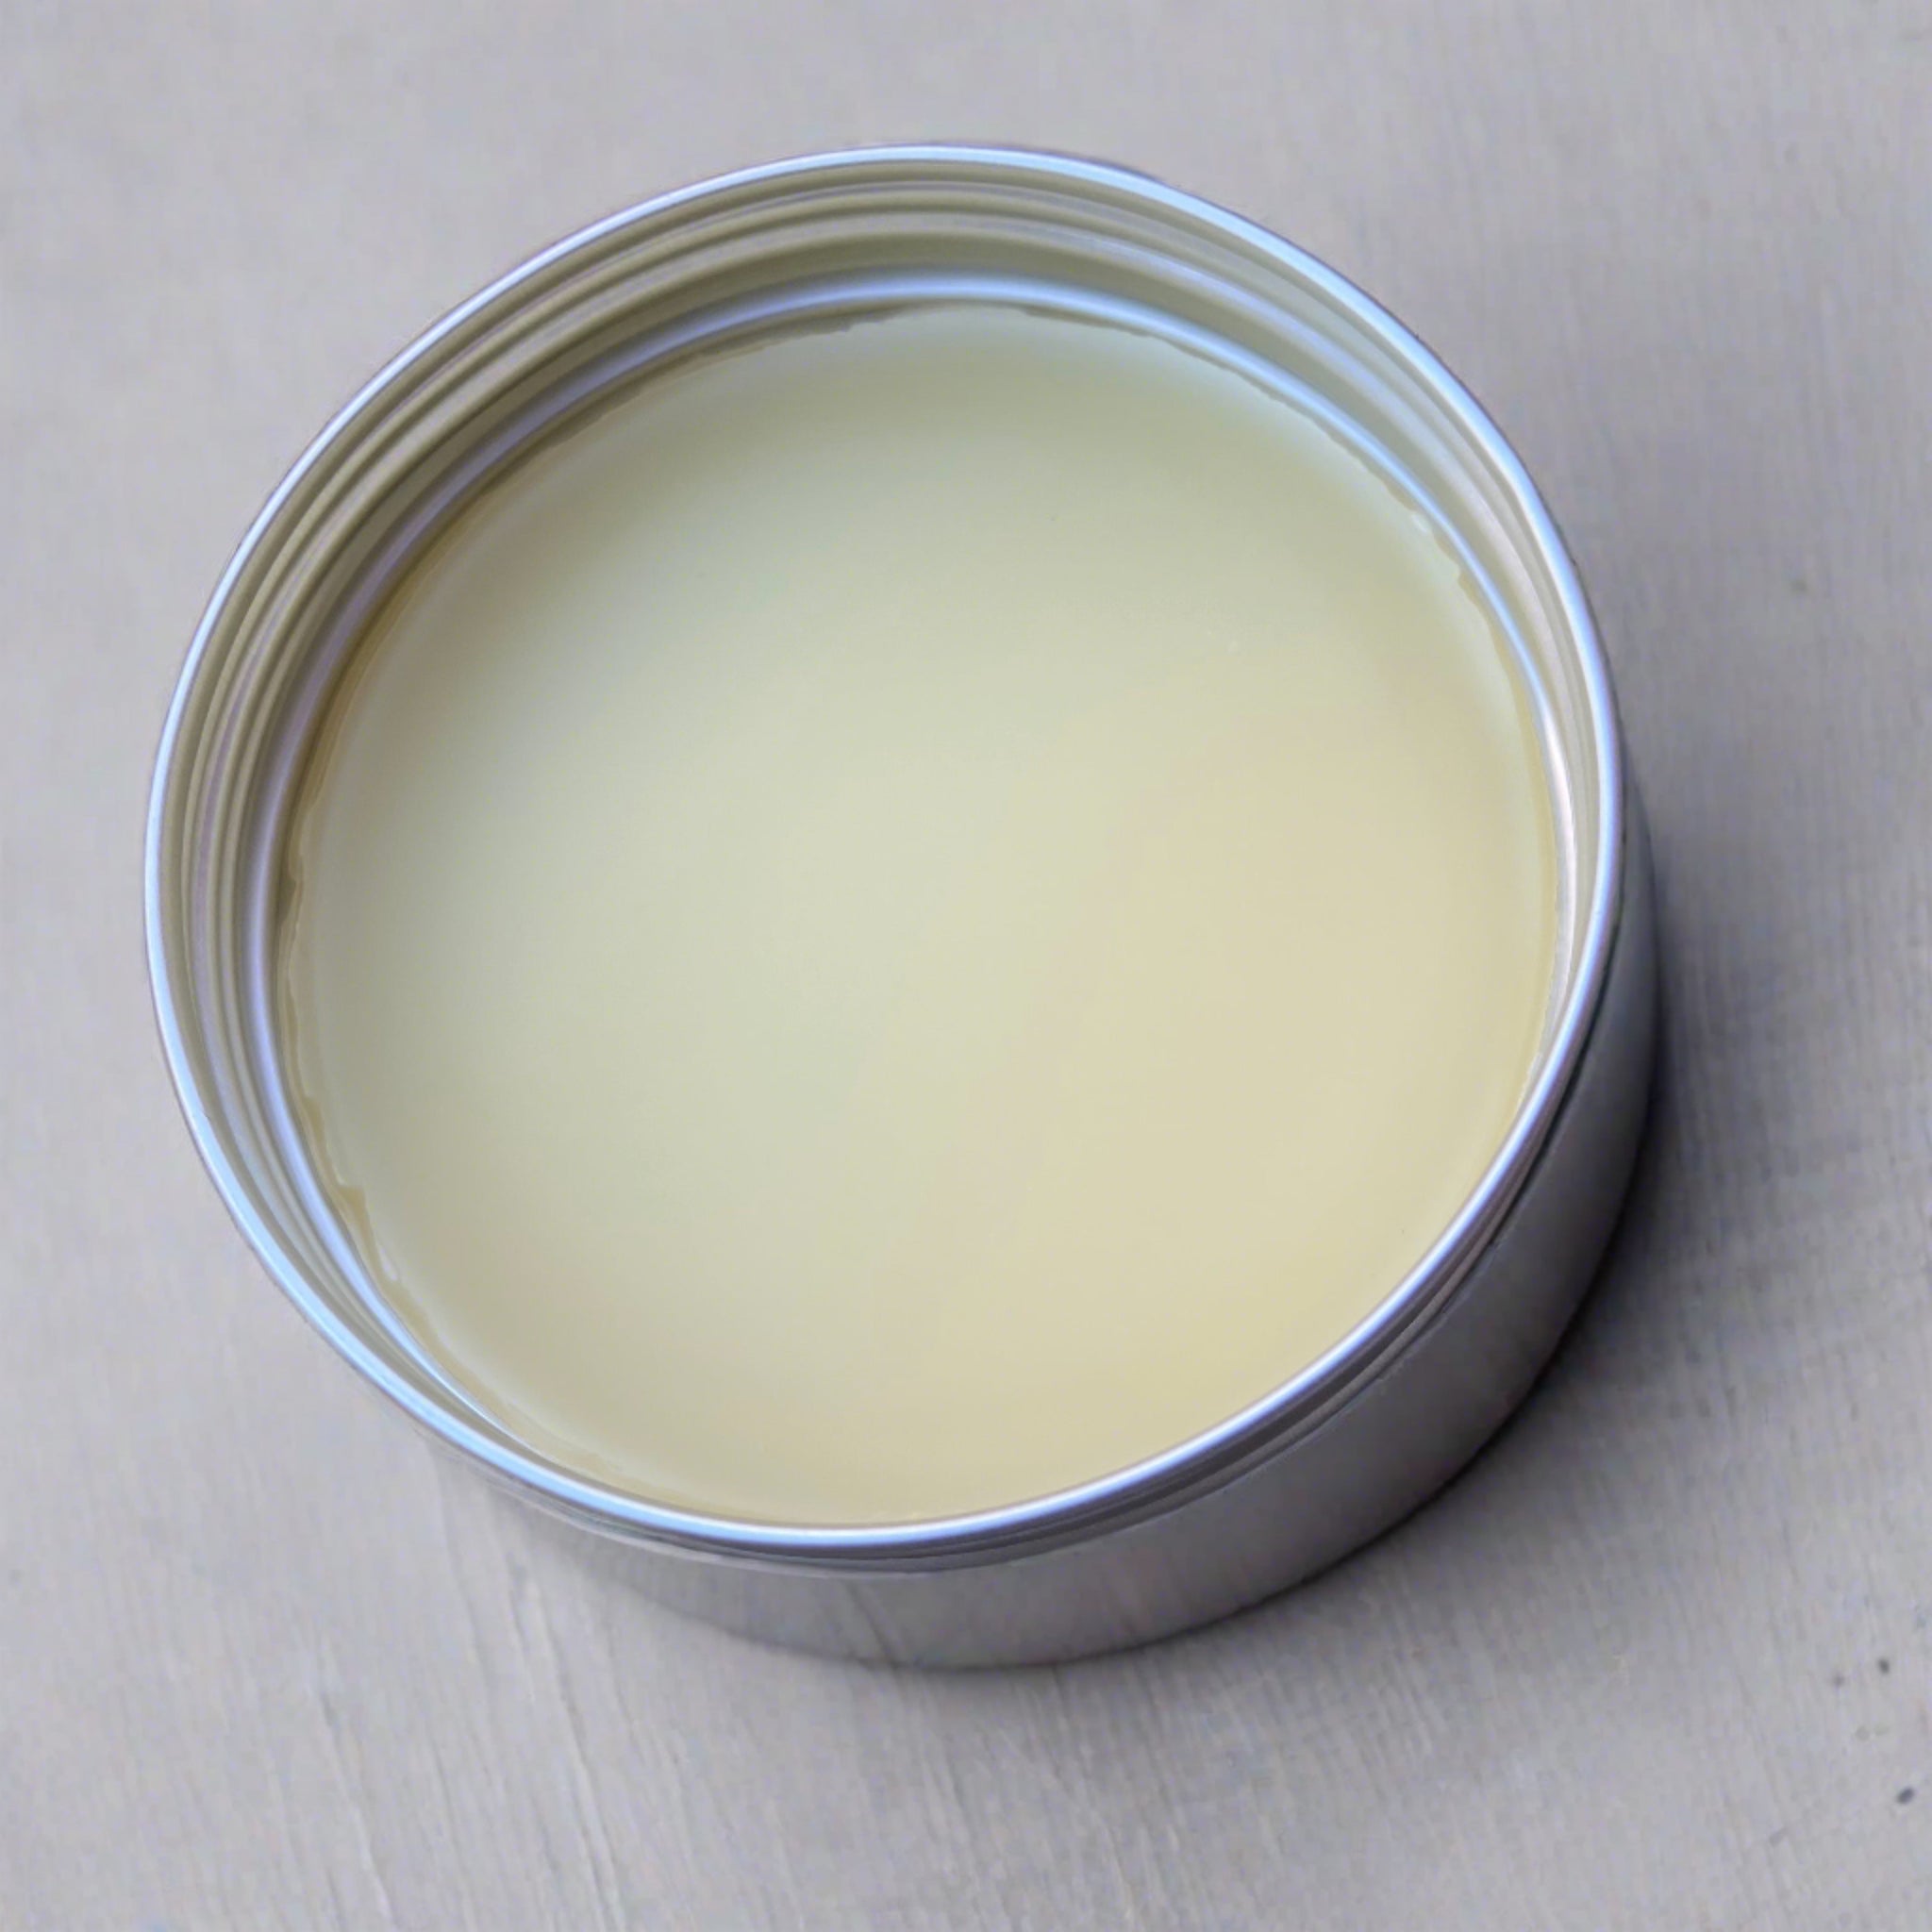 Natural hand balm on rock background